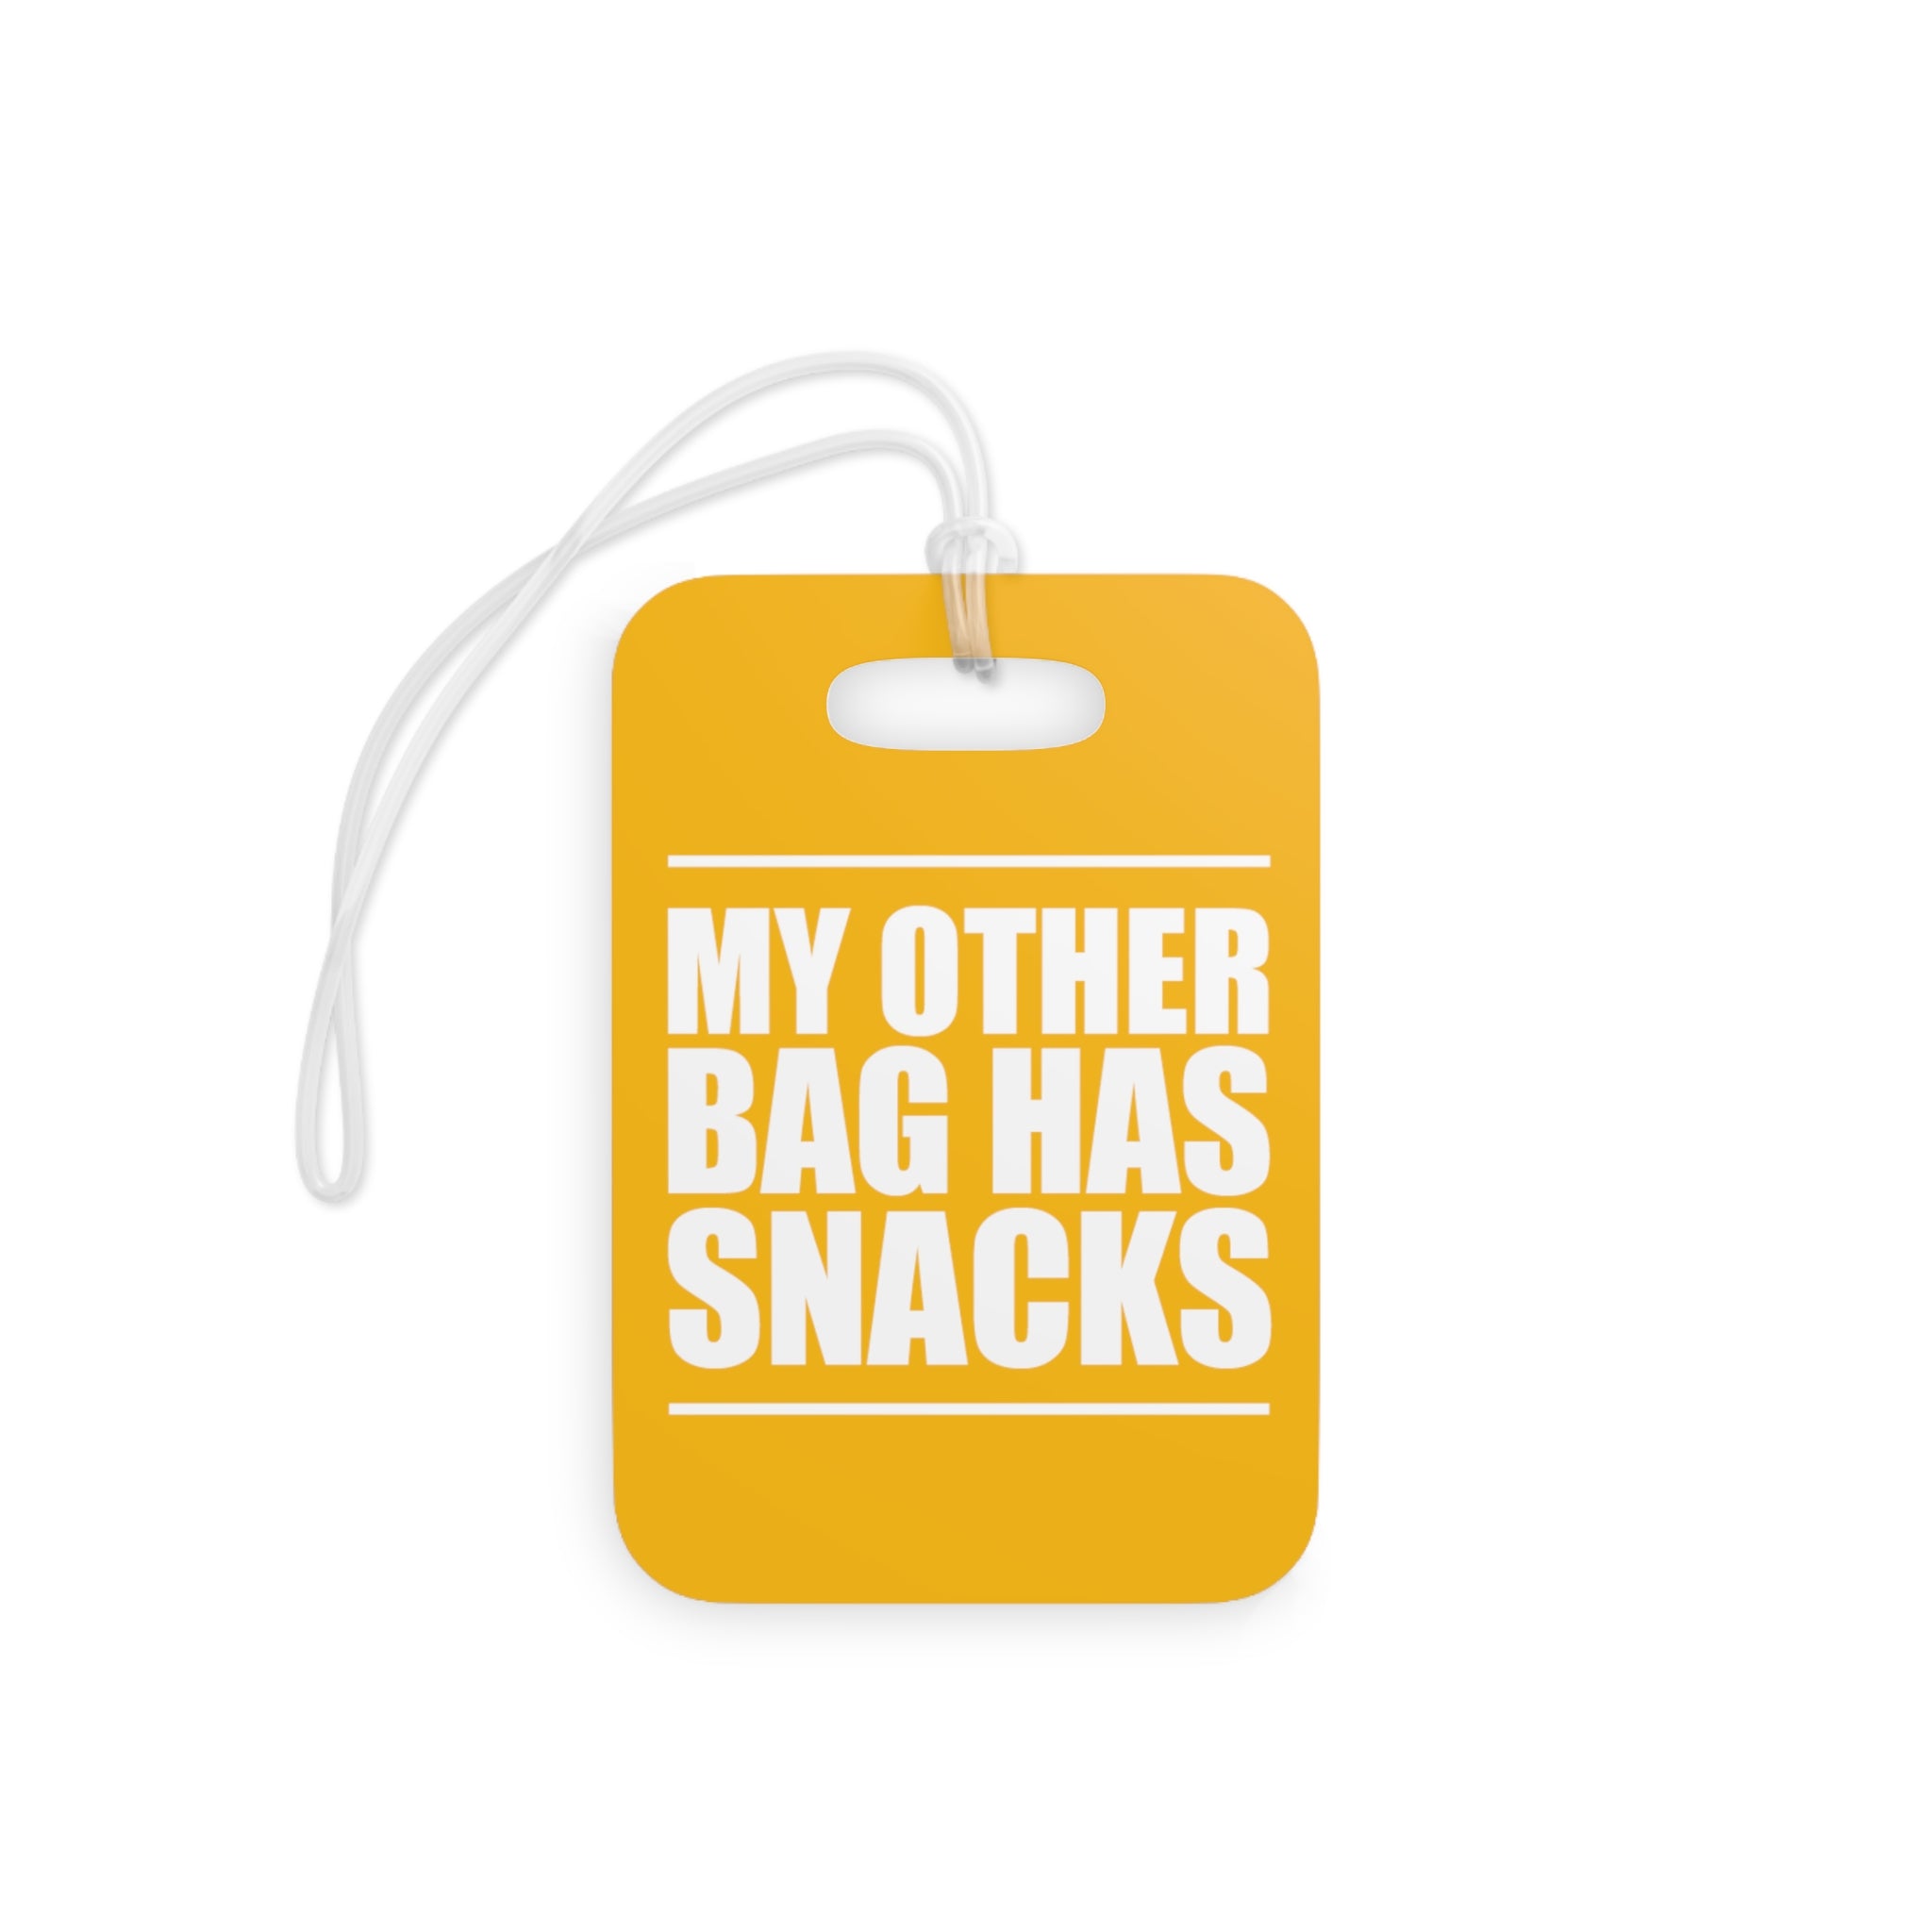 My other bag has snacks Luggage Tag (Yellow)